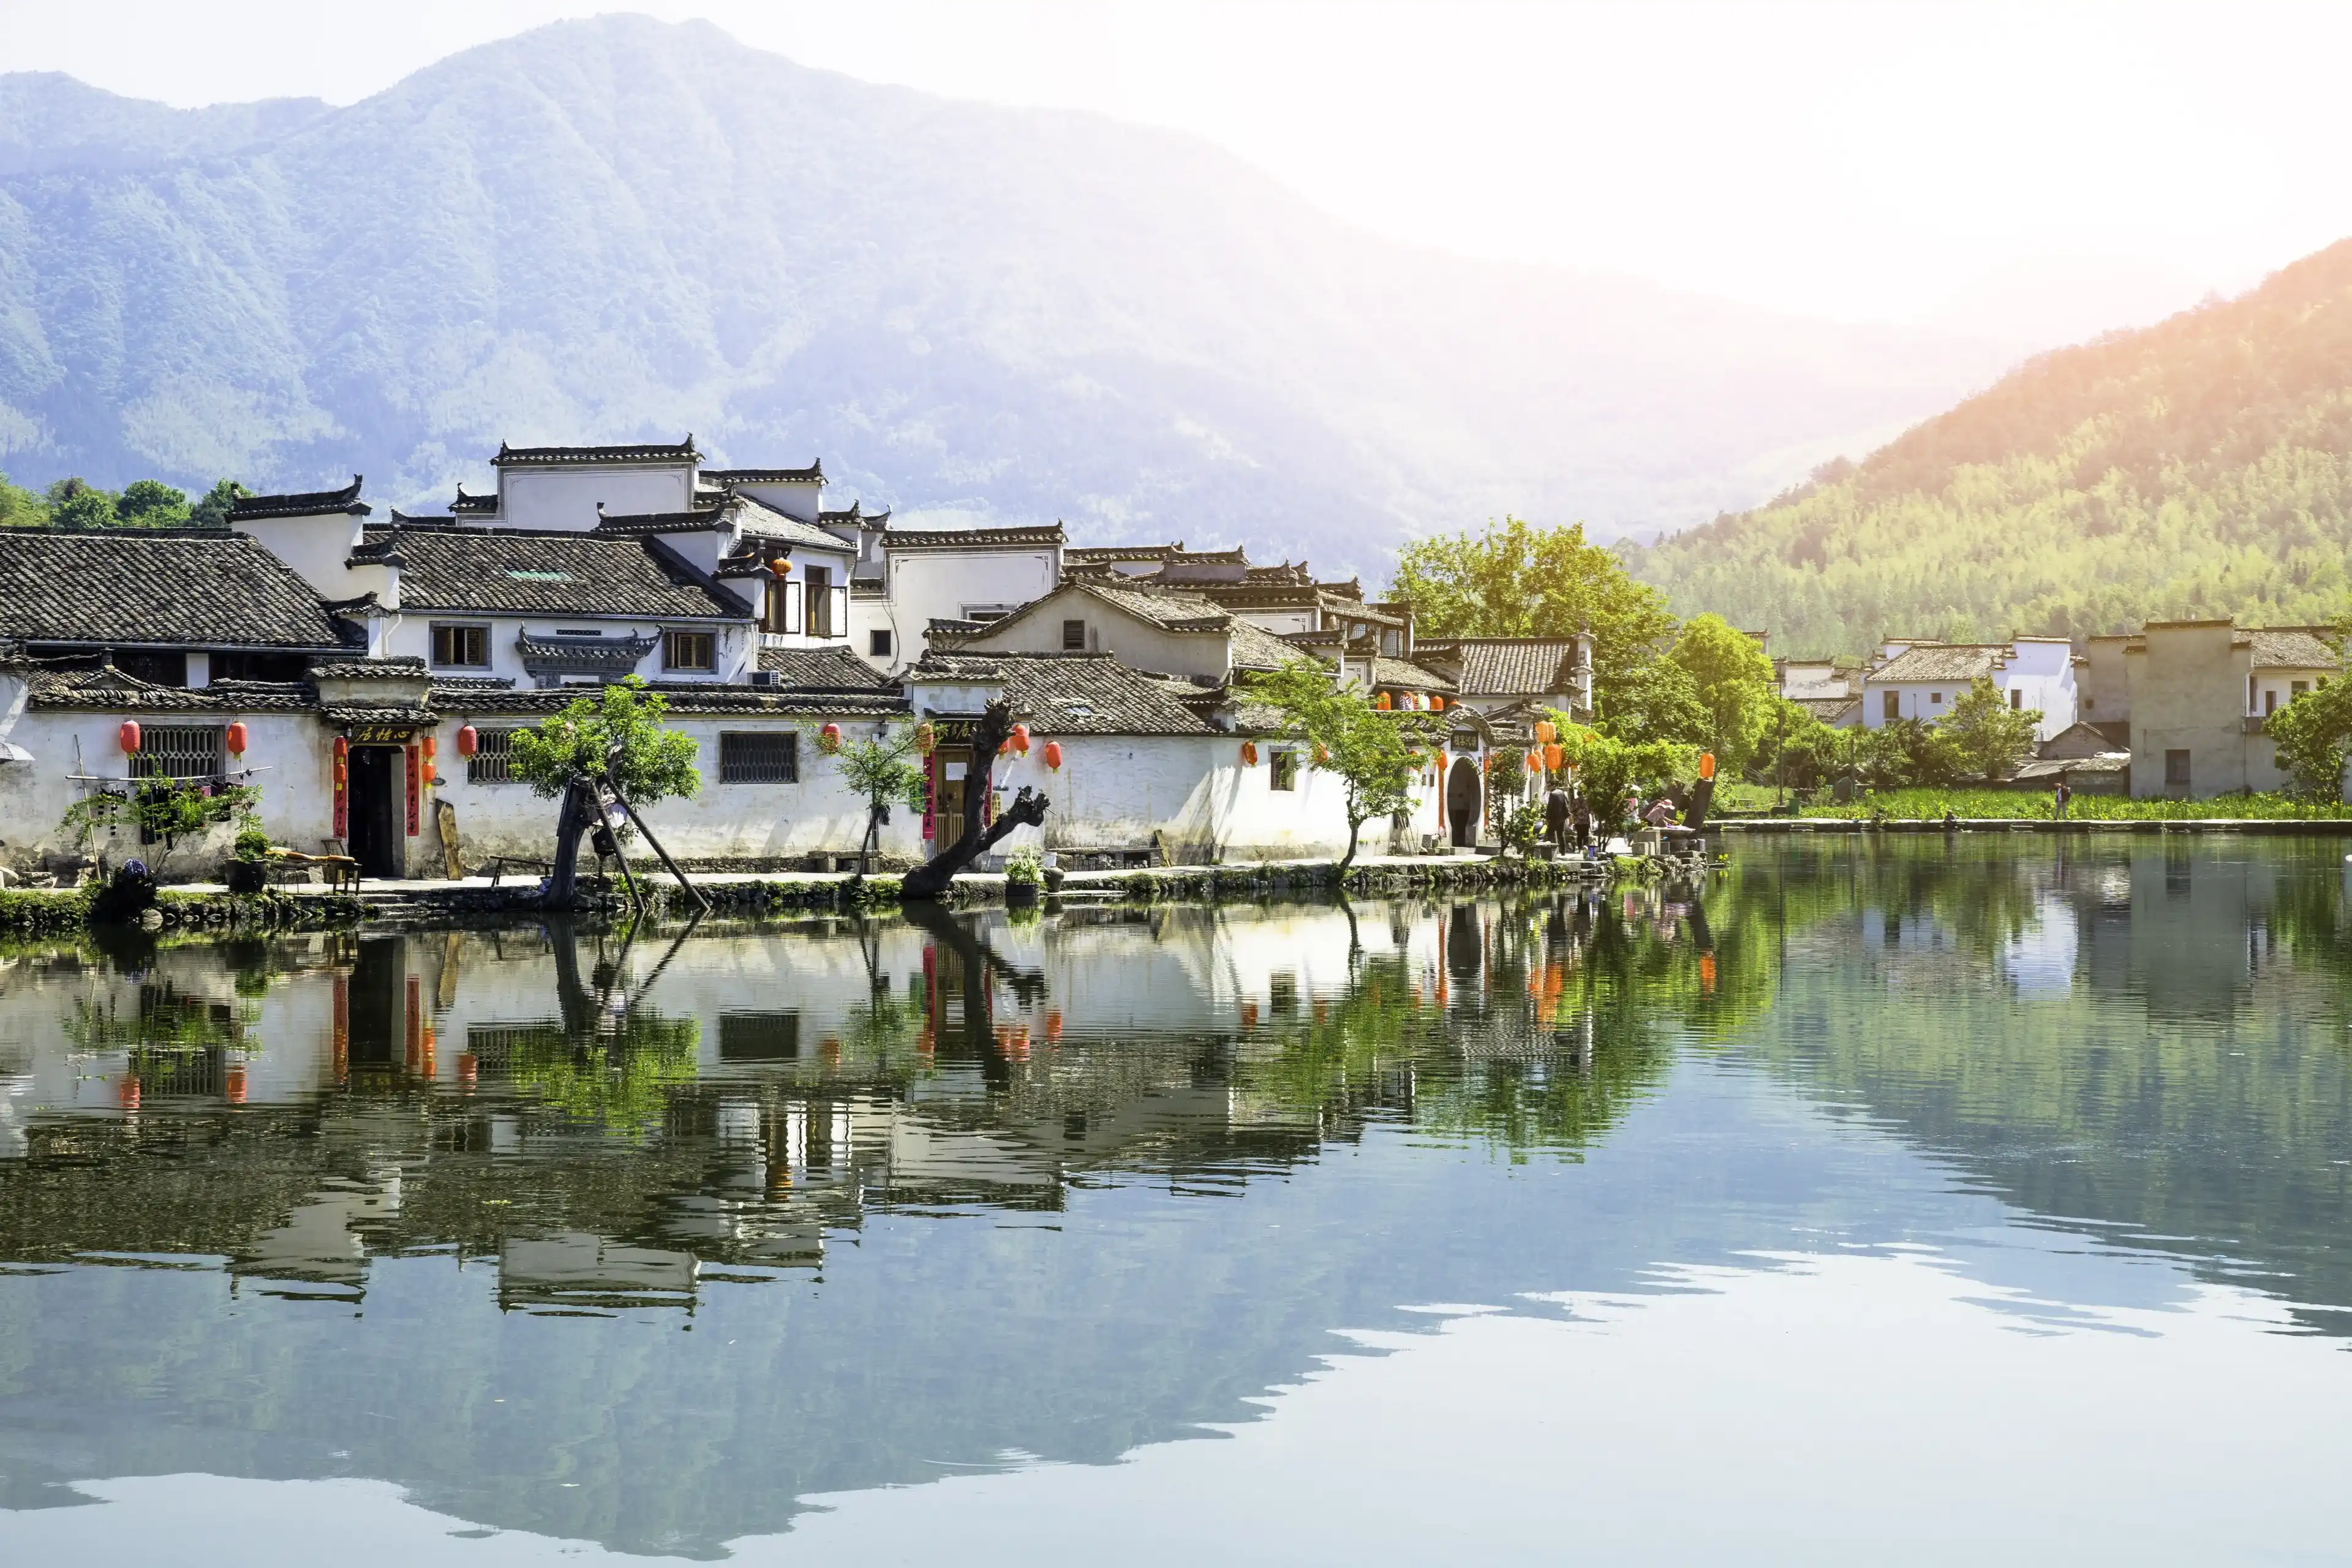 Hongcun village scenery in Huangshan, Anhui, China. The village is an ancient village. It is located near Mount Huangshan. Hongcun is a famous historical village in China, UNESCO heritage site